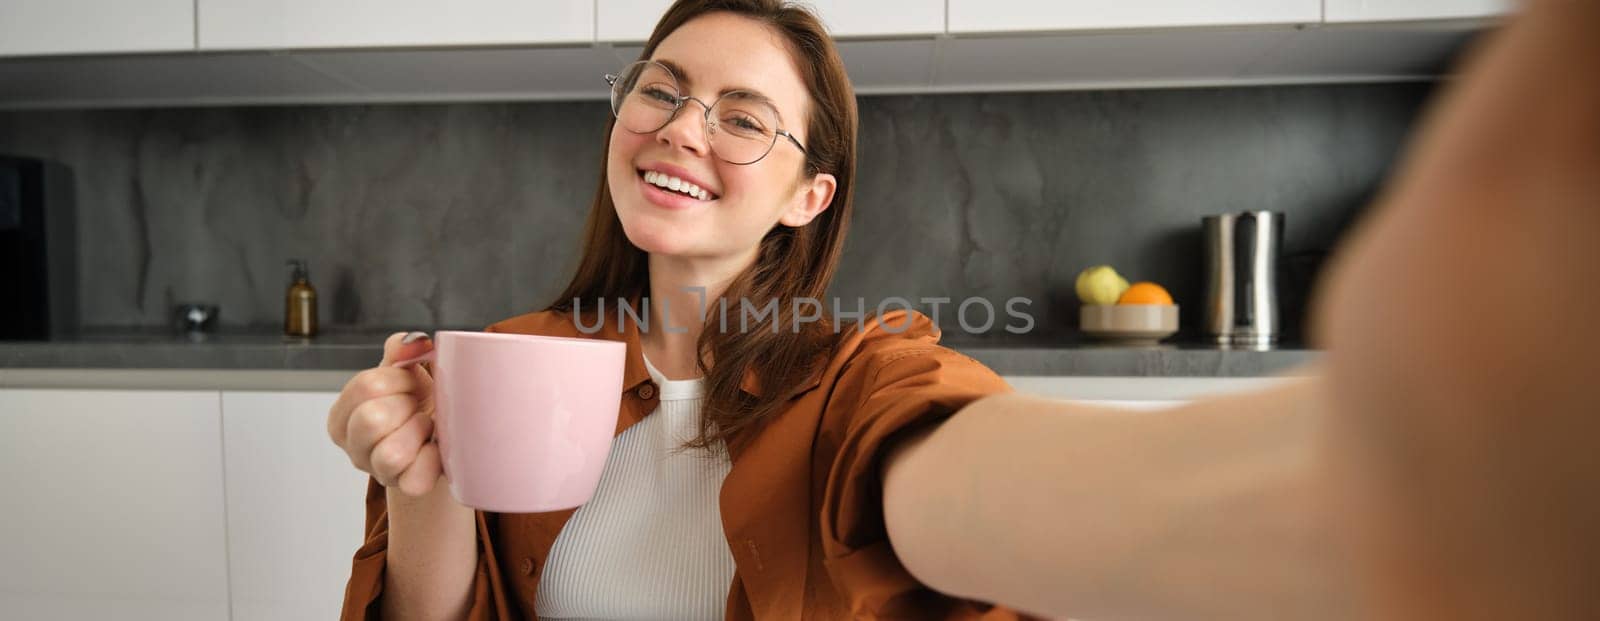 Carefree girl in glasses, takes selfie with smartphone, smiling and looking happy, enjoying hot drink in kitchen at home.